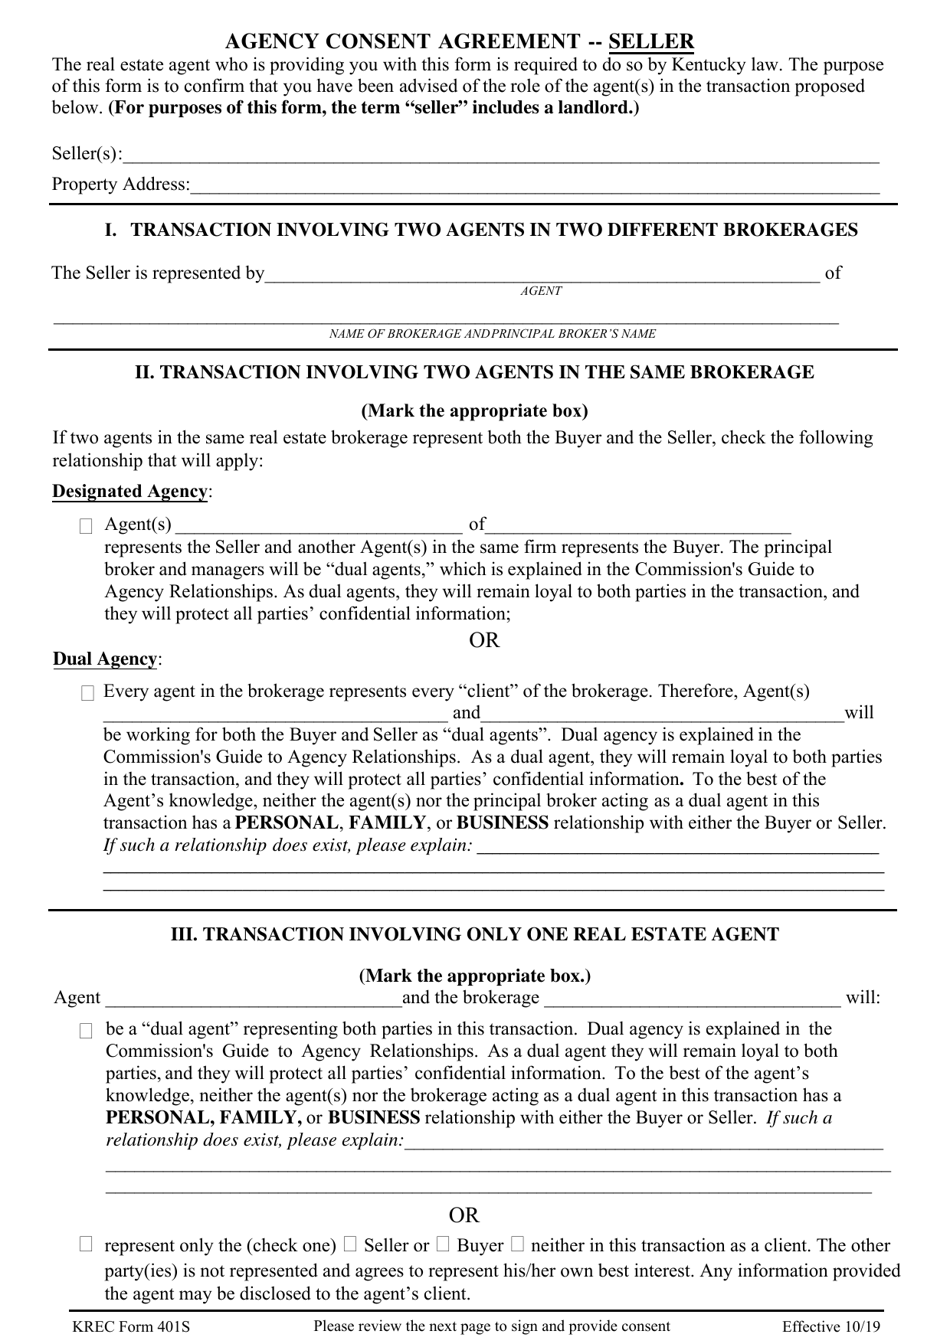 KREC Form 401S Agency Consent Agreement - Seller - Kentucky, Page 1